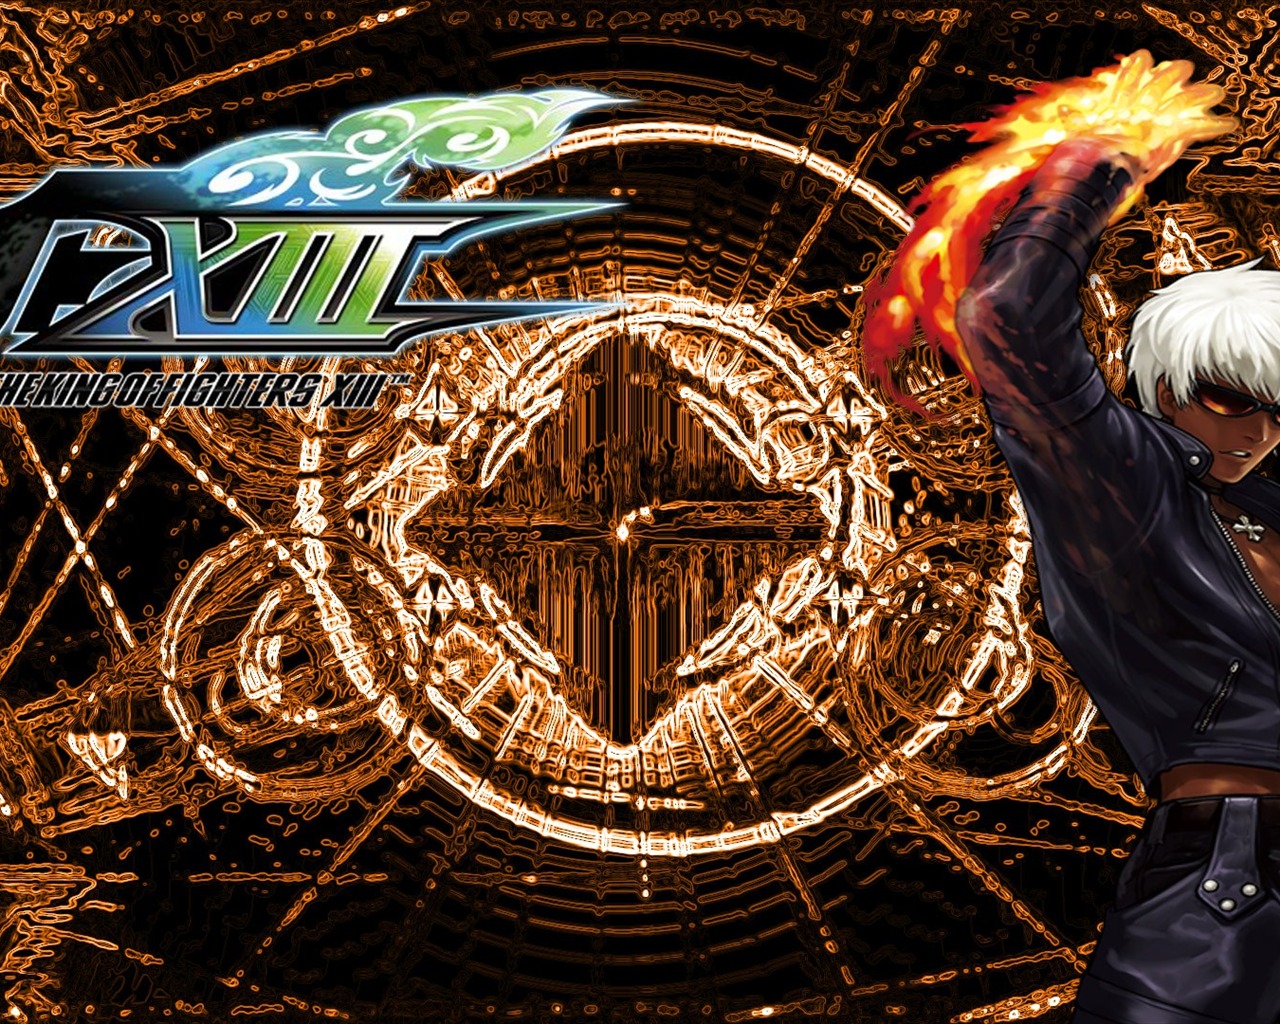 The King of Fighters XIII 拳皇13 壁纸专辑8 - 1280x1024